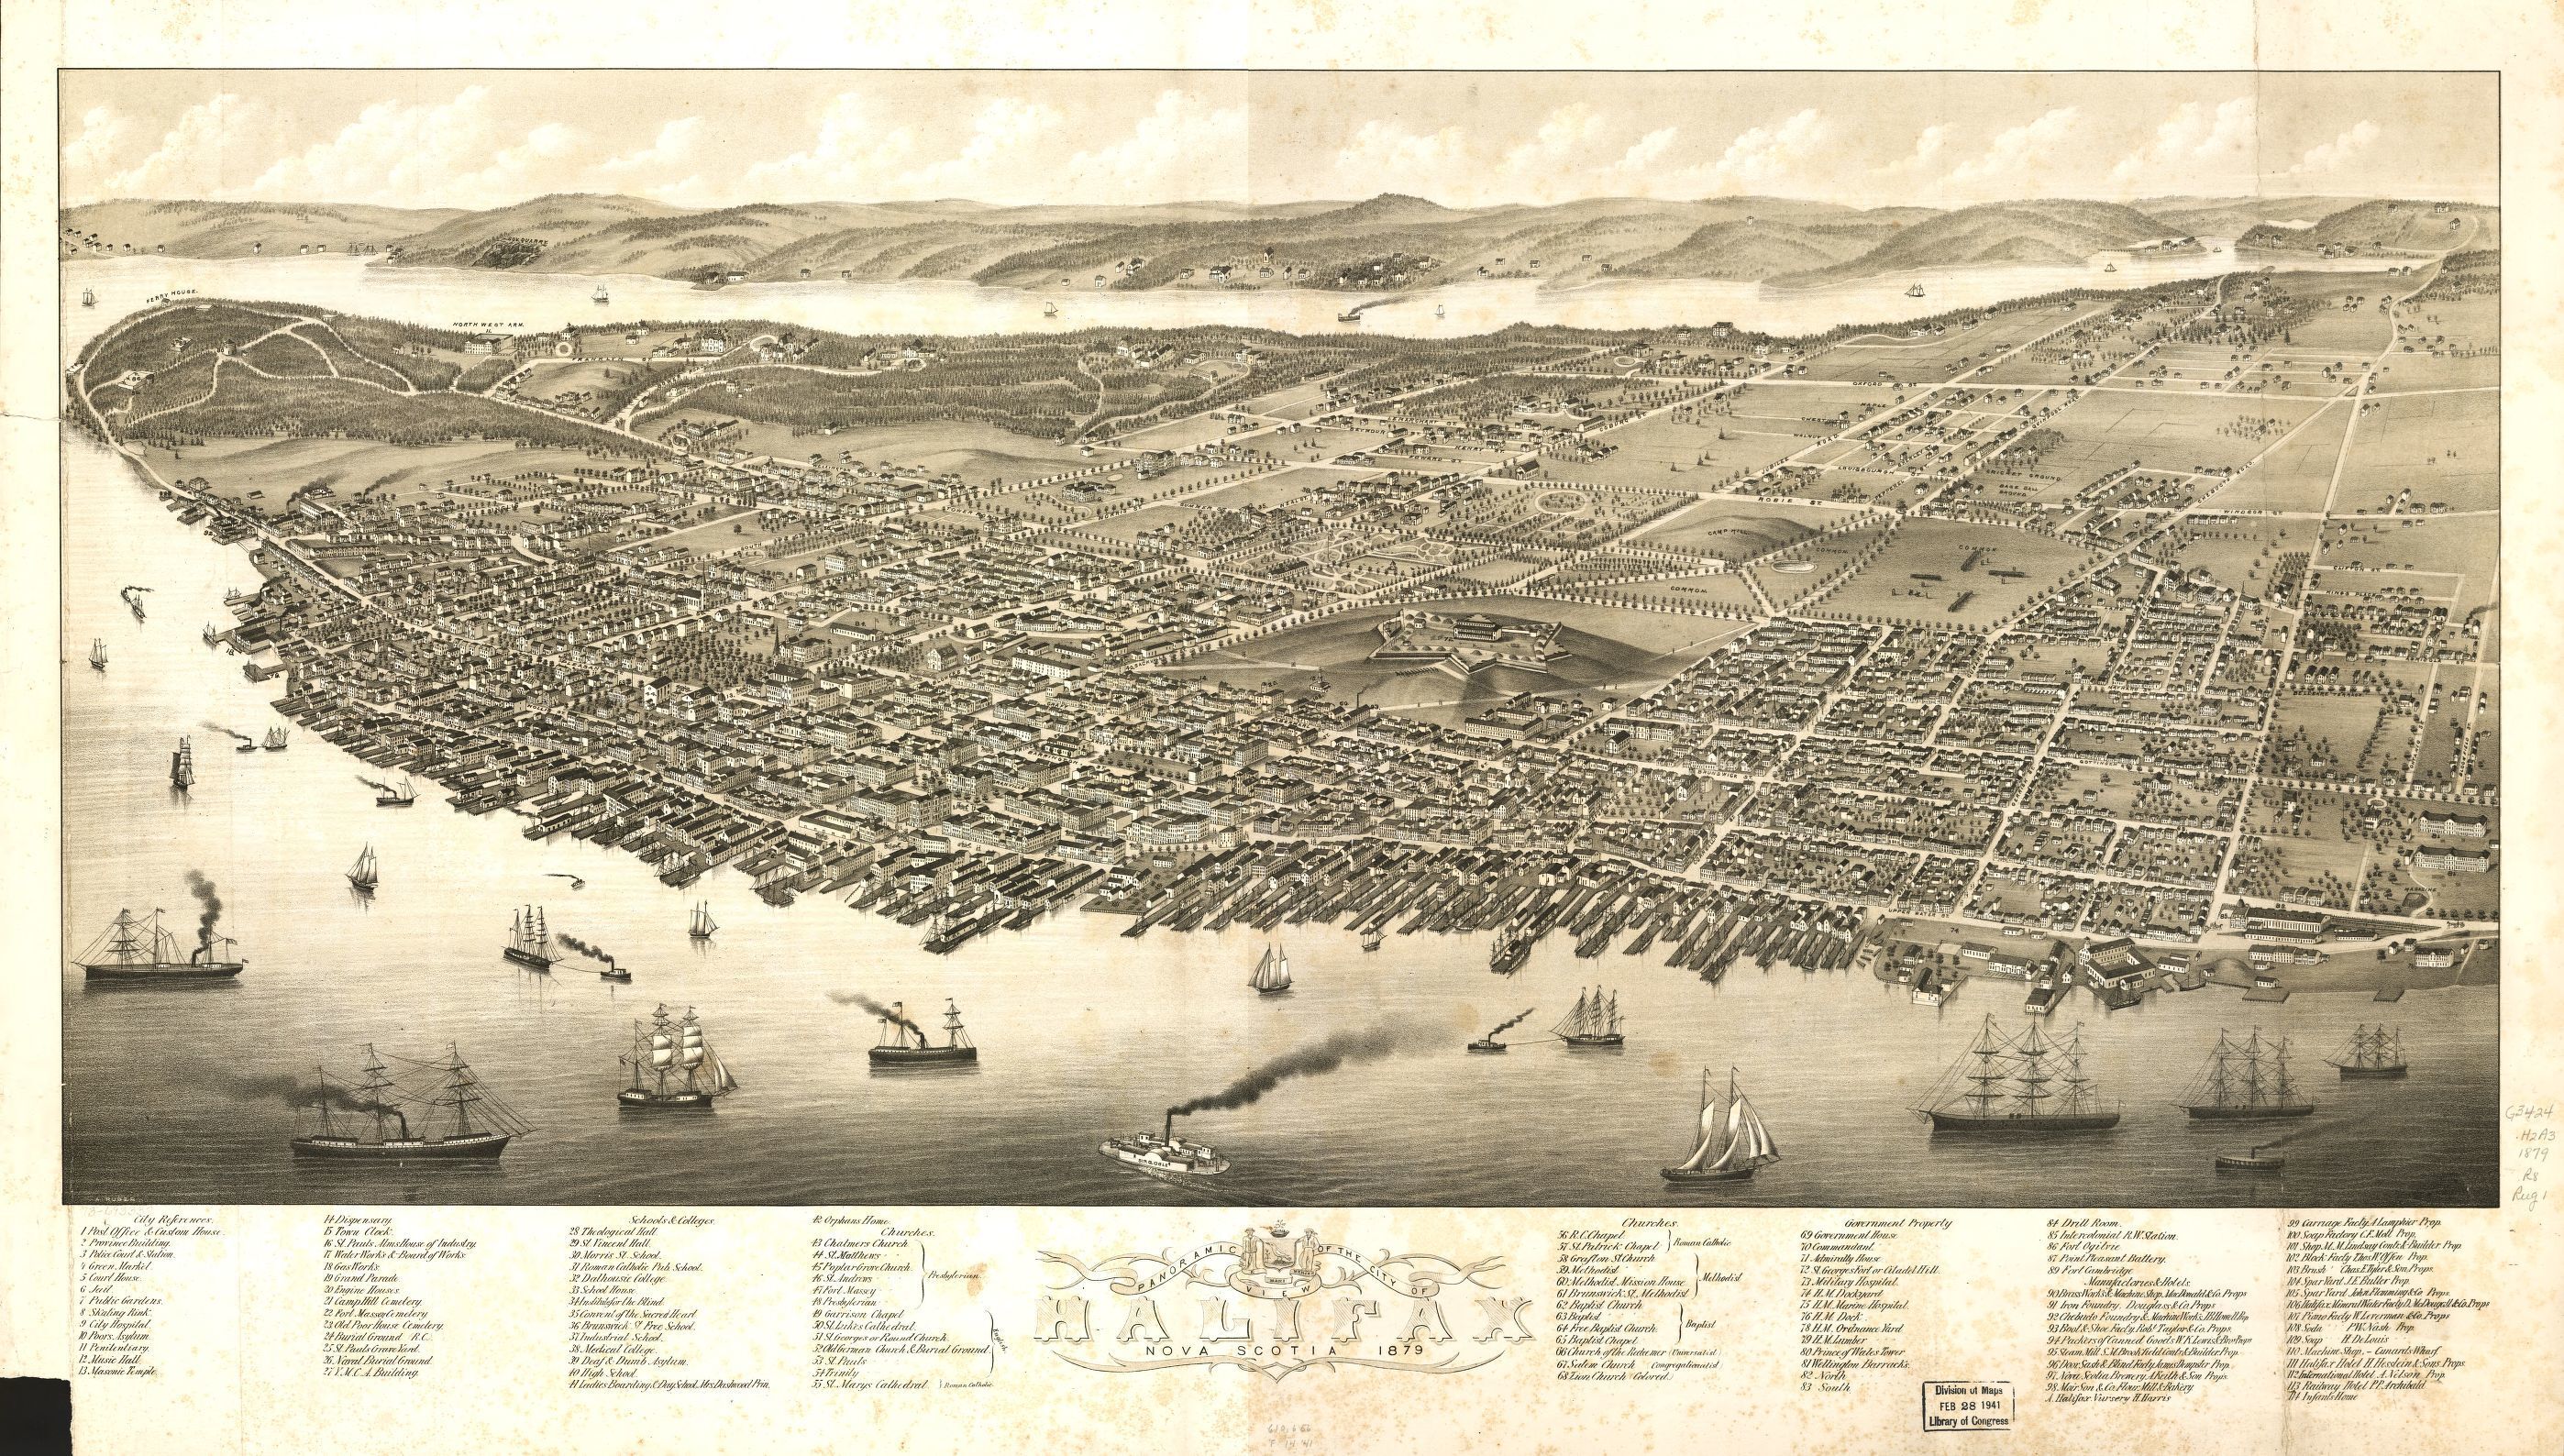 Panoramic view of Halifax, Nova Scotia, with buildings and ships